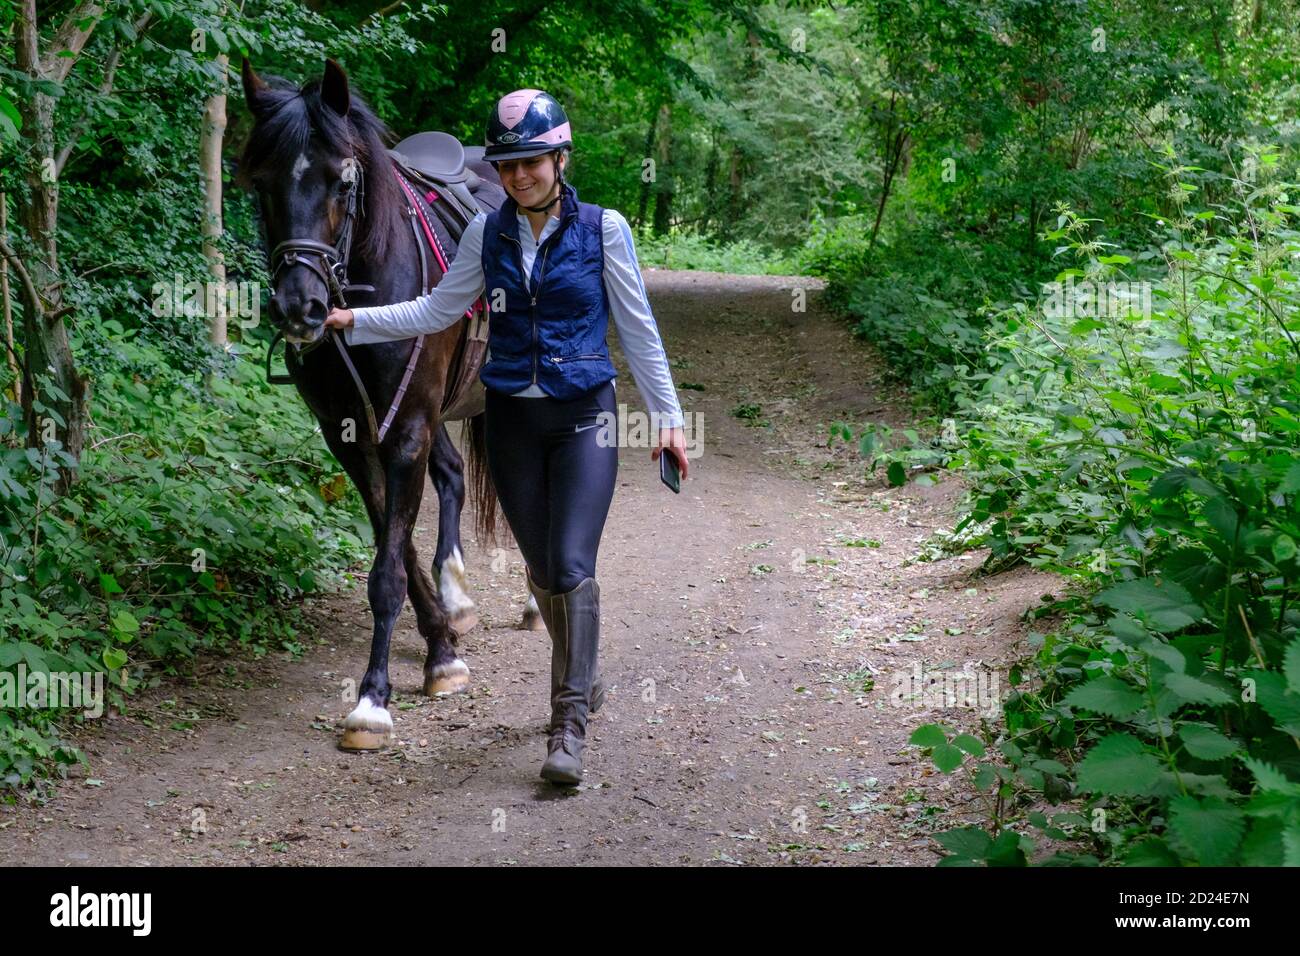 Smiling young lady in riding gear leads a brown horse on a wooded bridleway. Pinner Wood, Harrow, NW London. Stock Photo